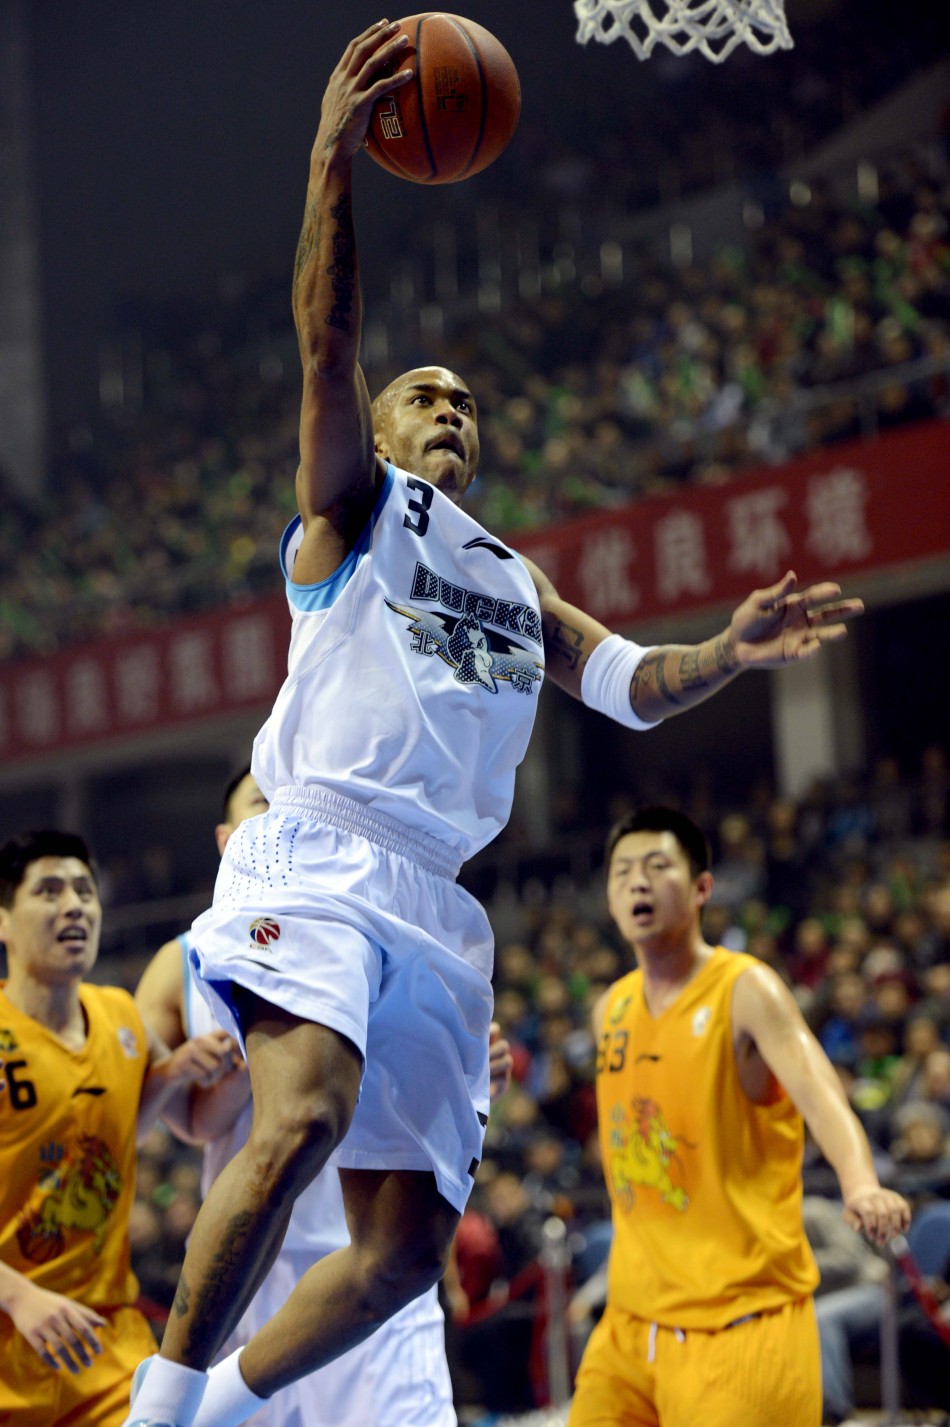 Stephone Marbury of Beijing goes up for a basket in a CBA game between Beijing and Shanxi on Jan.23, 2013.